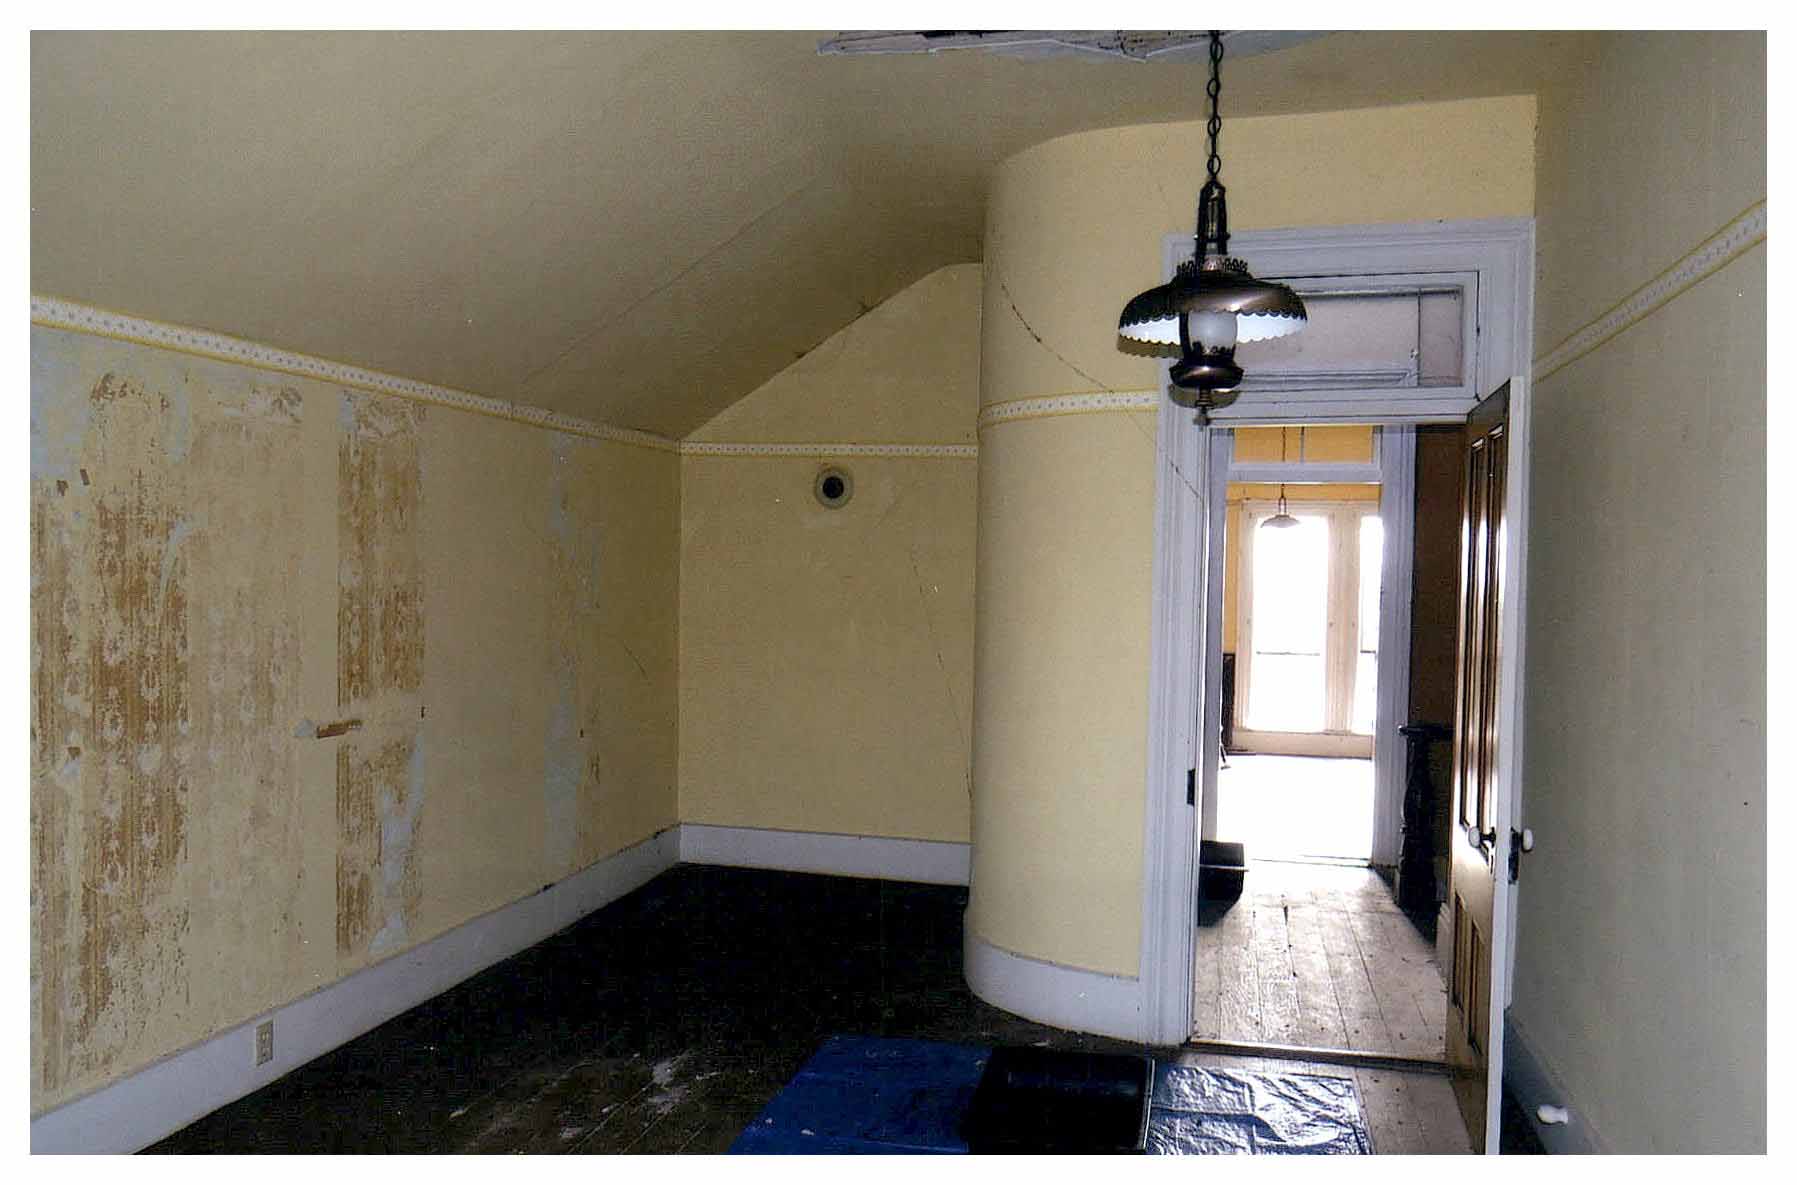 Before: same view of bedroom with unpainted faded light yellow walls.